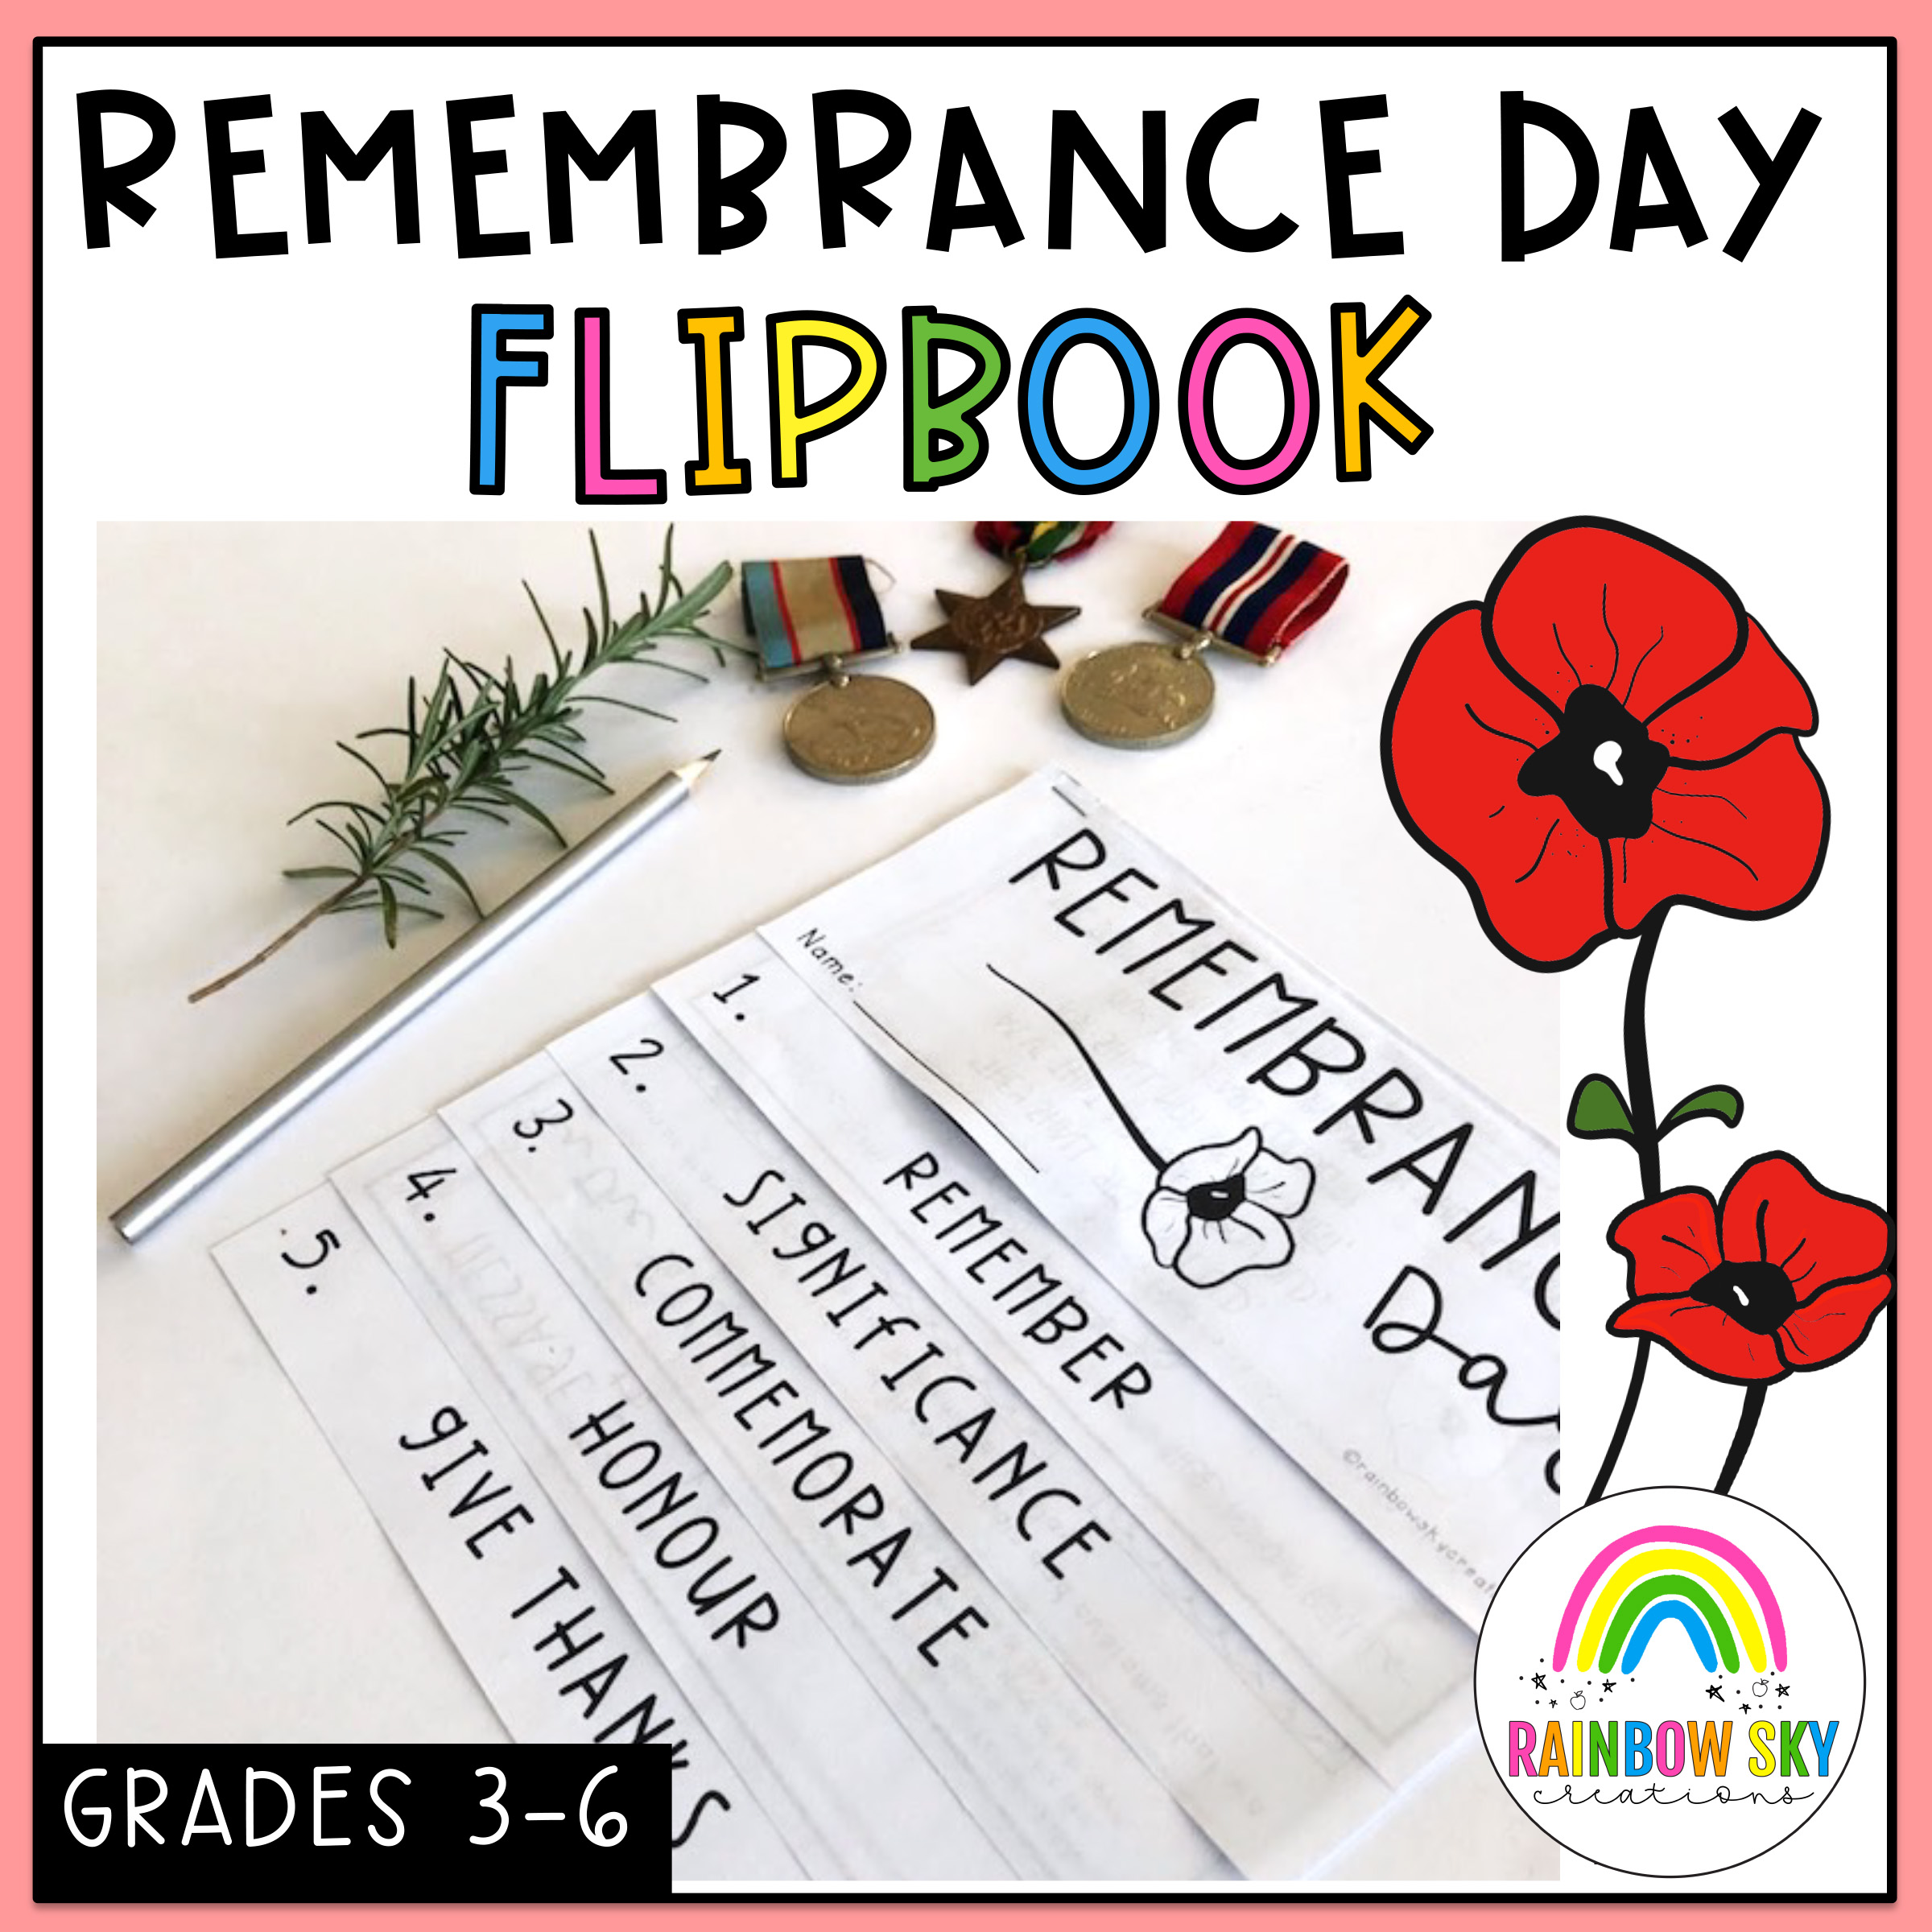 Remembrance Day Flipbook